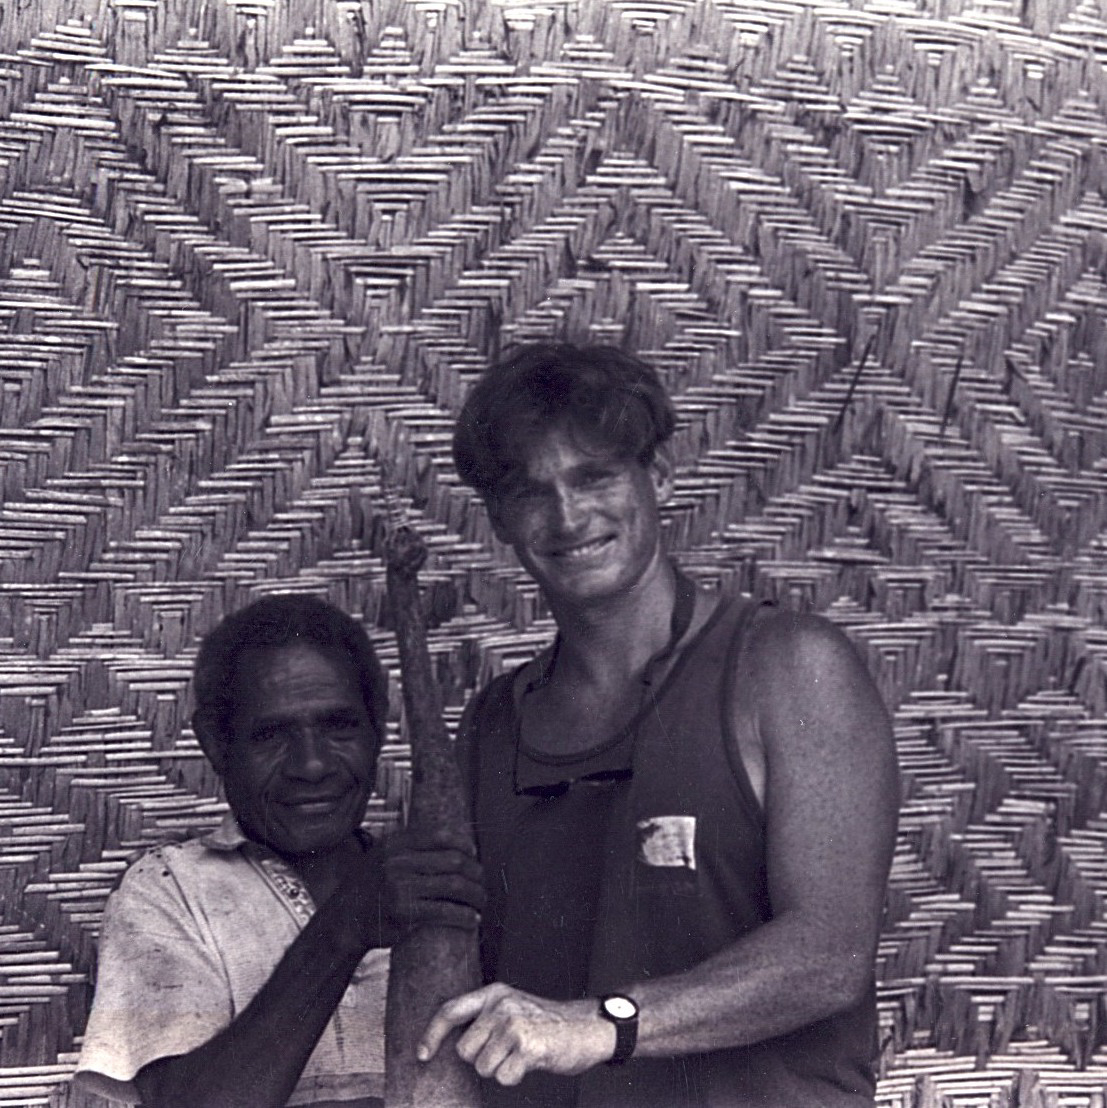 Me with Abelam Man Holding Prize Long Yam, On Collecting Trip for New Guinea Art, 1994